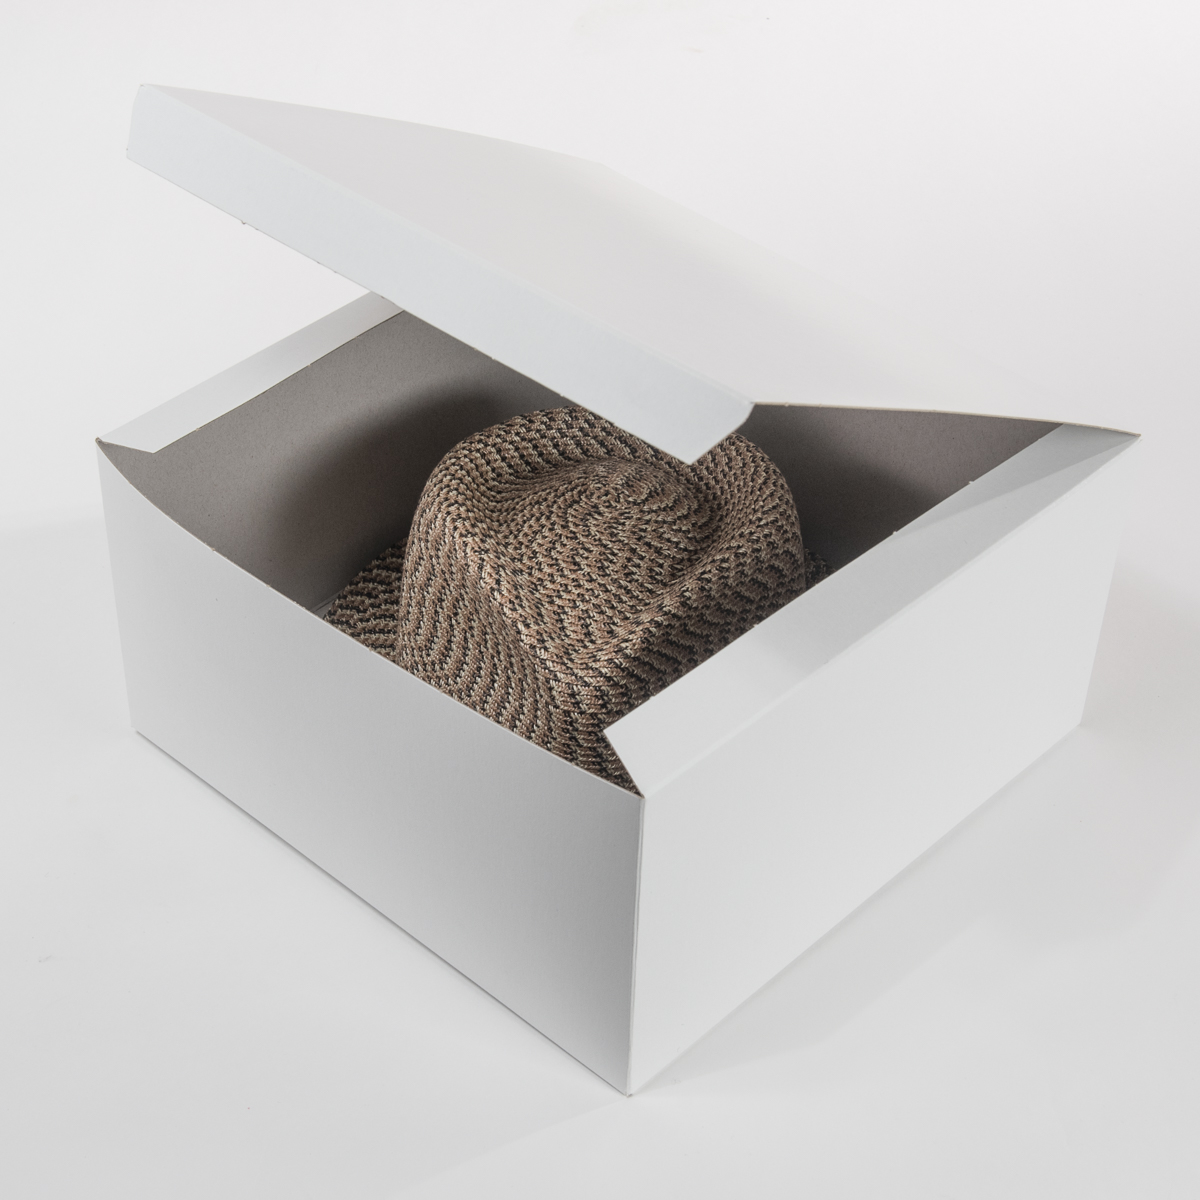 Hat Boxes With Lids - Cardboard Hat Boxes With Lids